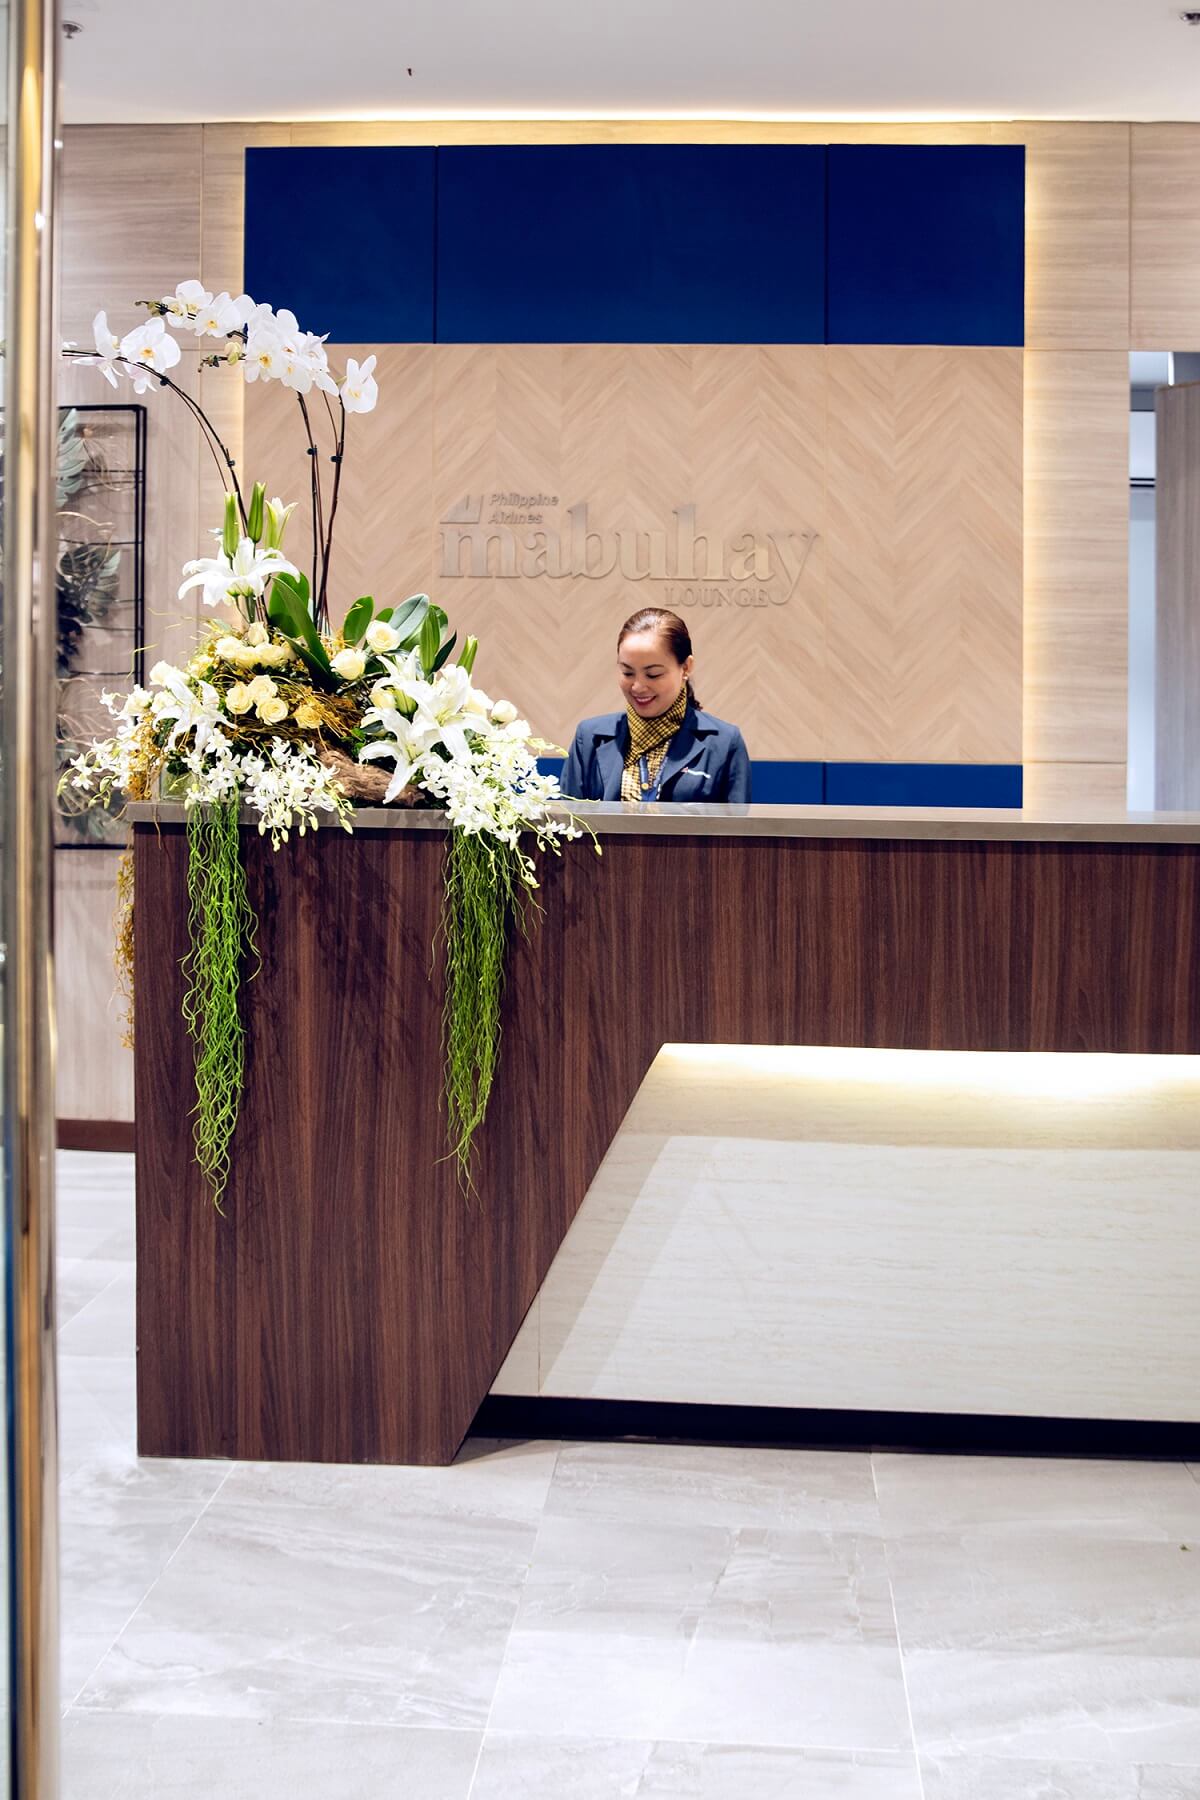  The new Mabuhay Lounge can accommodate 114 guests in spacious lounging areas with a modern vibe.